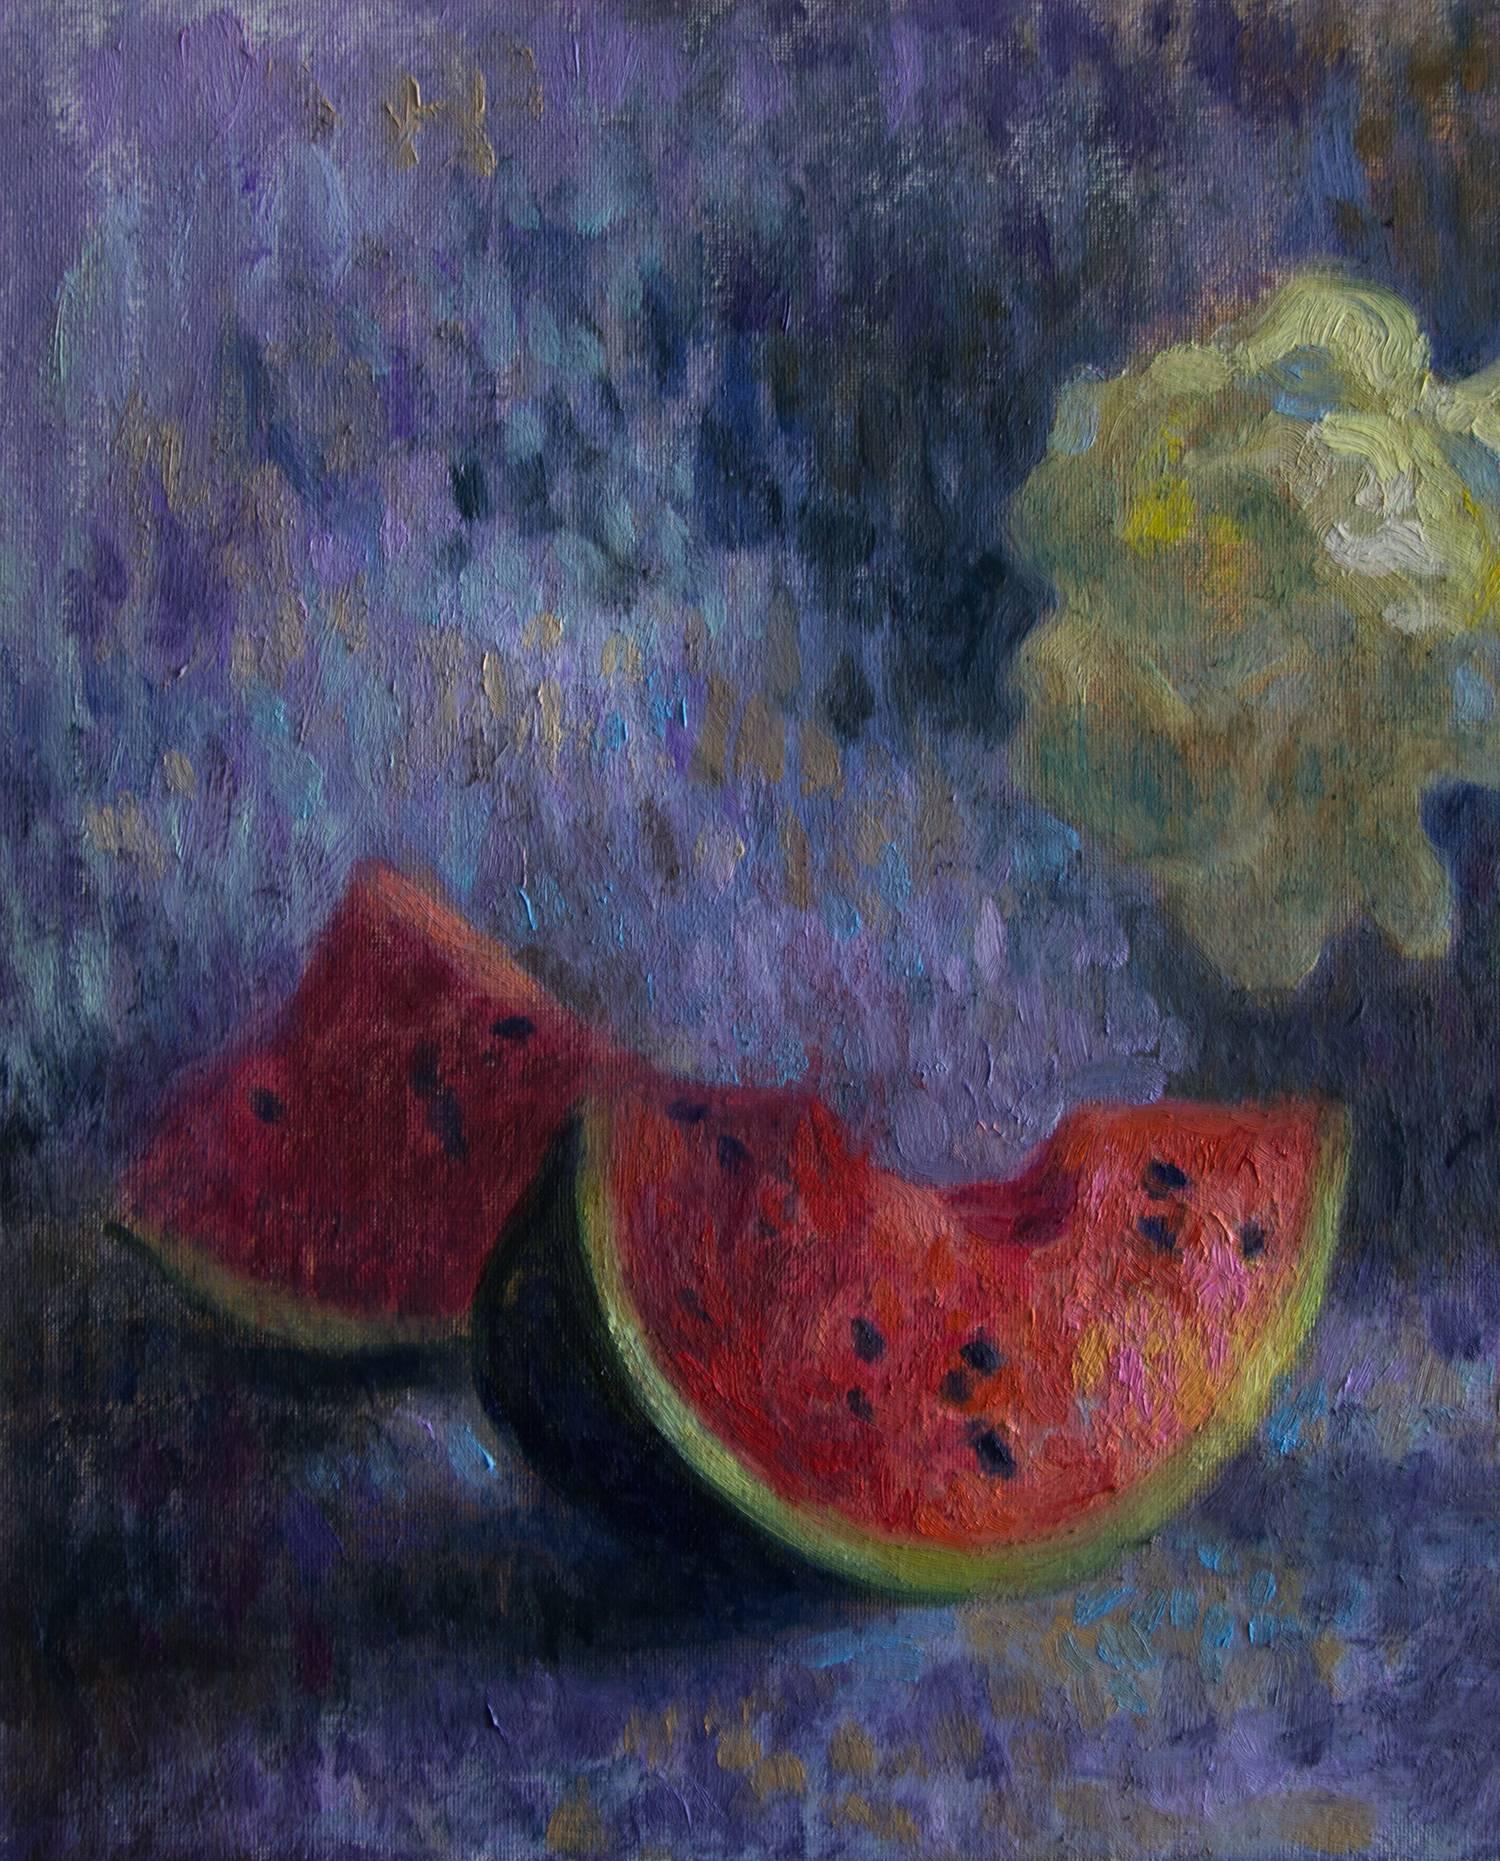 Title: Still Life with Watermelon and Flowers
Artist: Elina Arbidane (contemporary impressionist painter), Latvia
Original hand-painted still life
Oil paints on canvas
Not a print or copy, only one available
Signed on the front
Measure: 50 cm